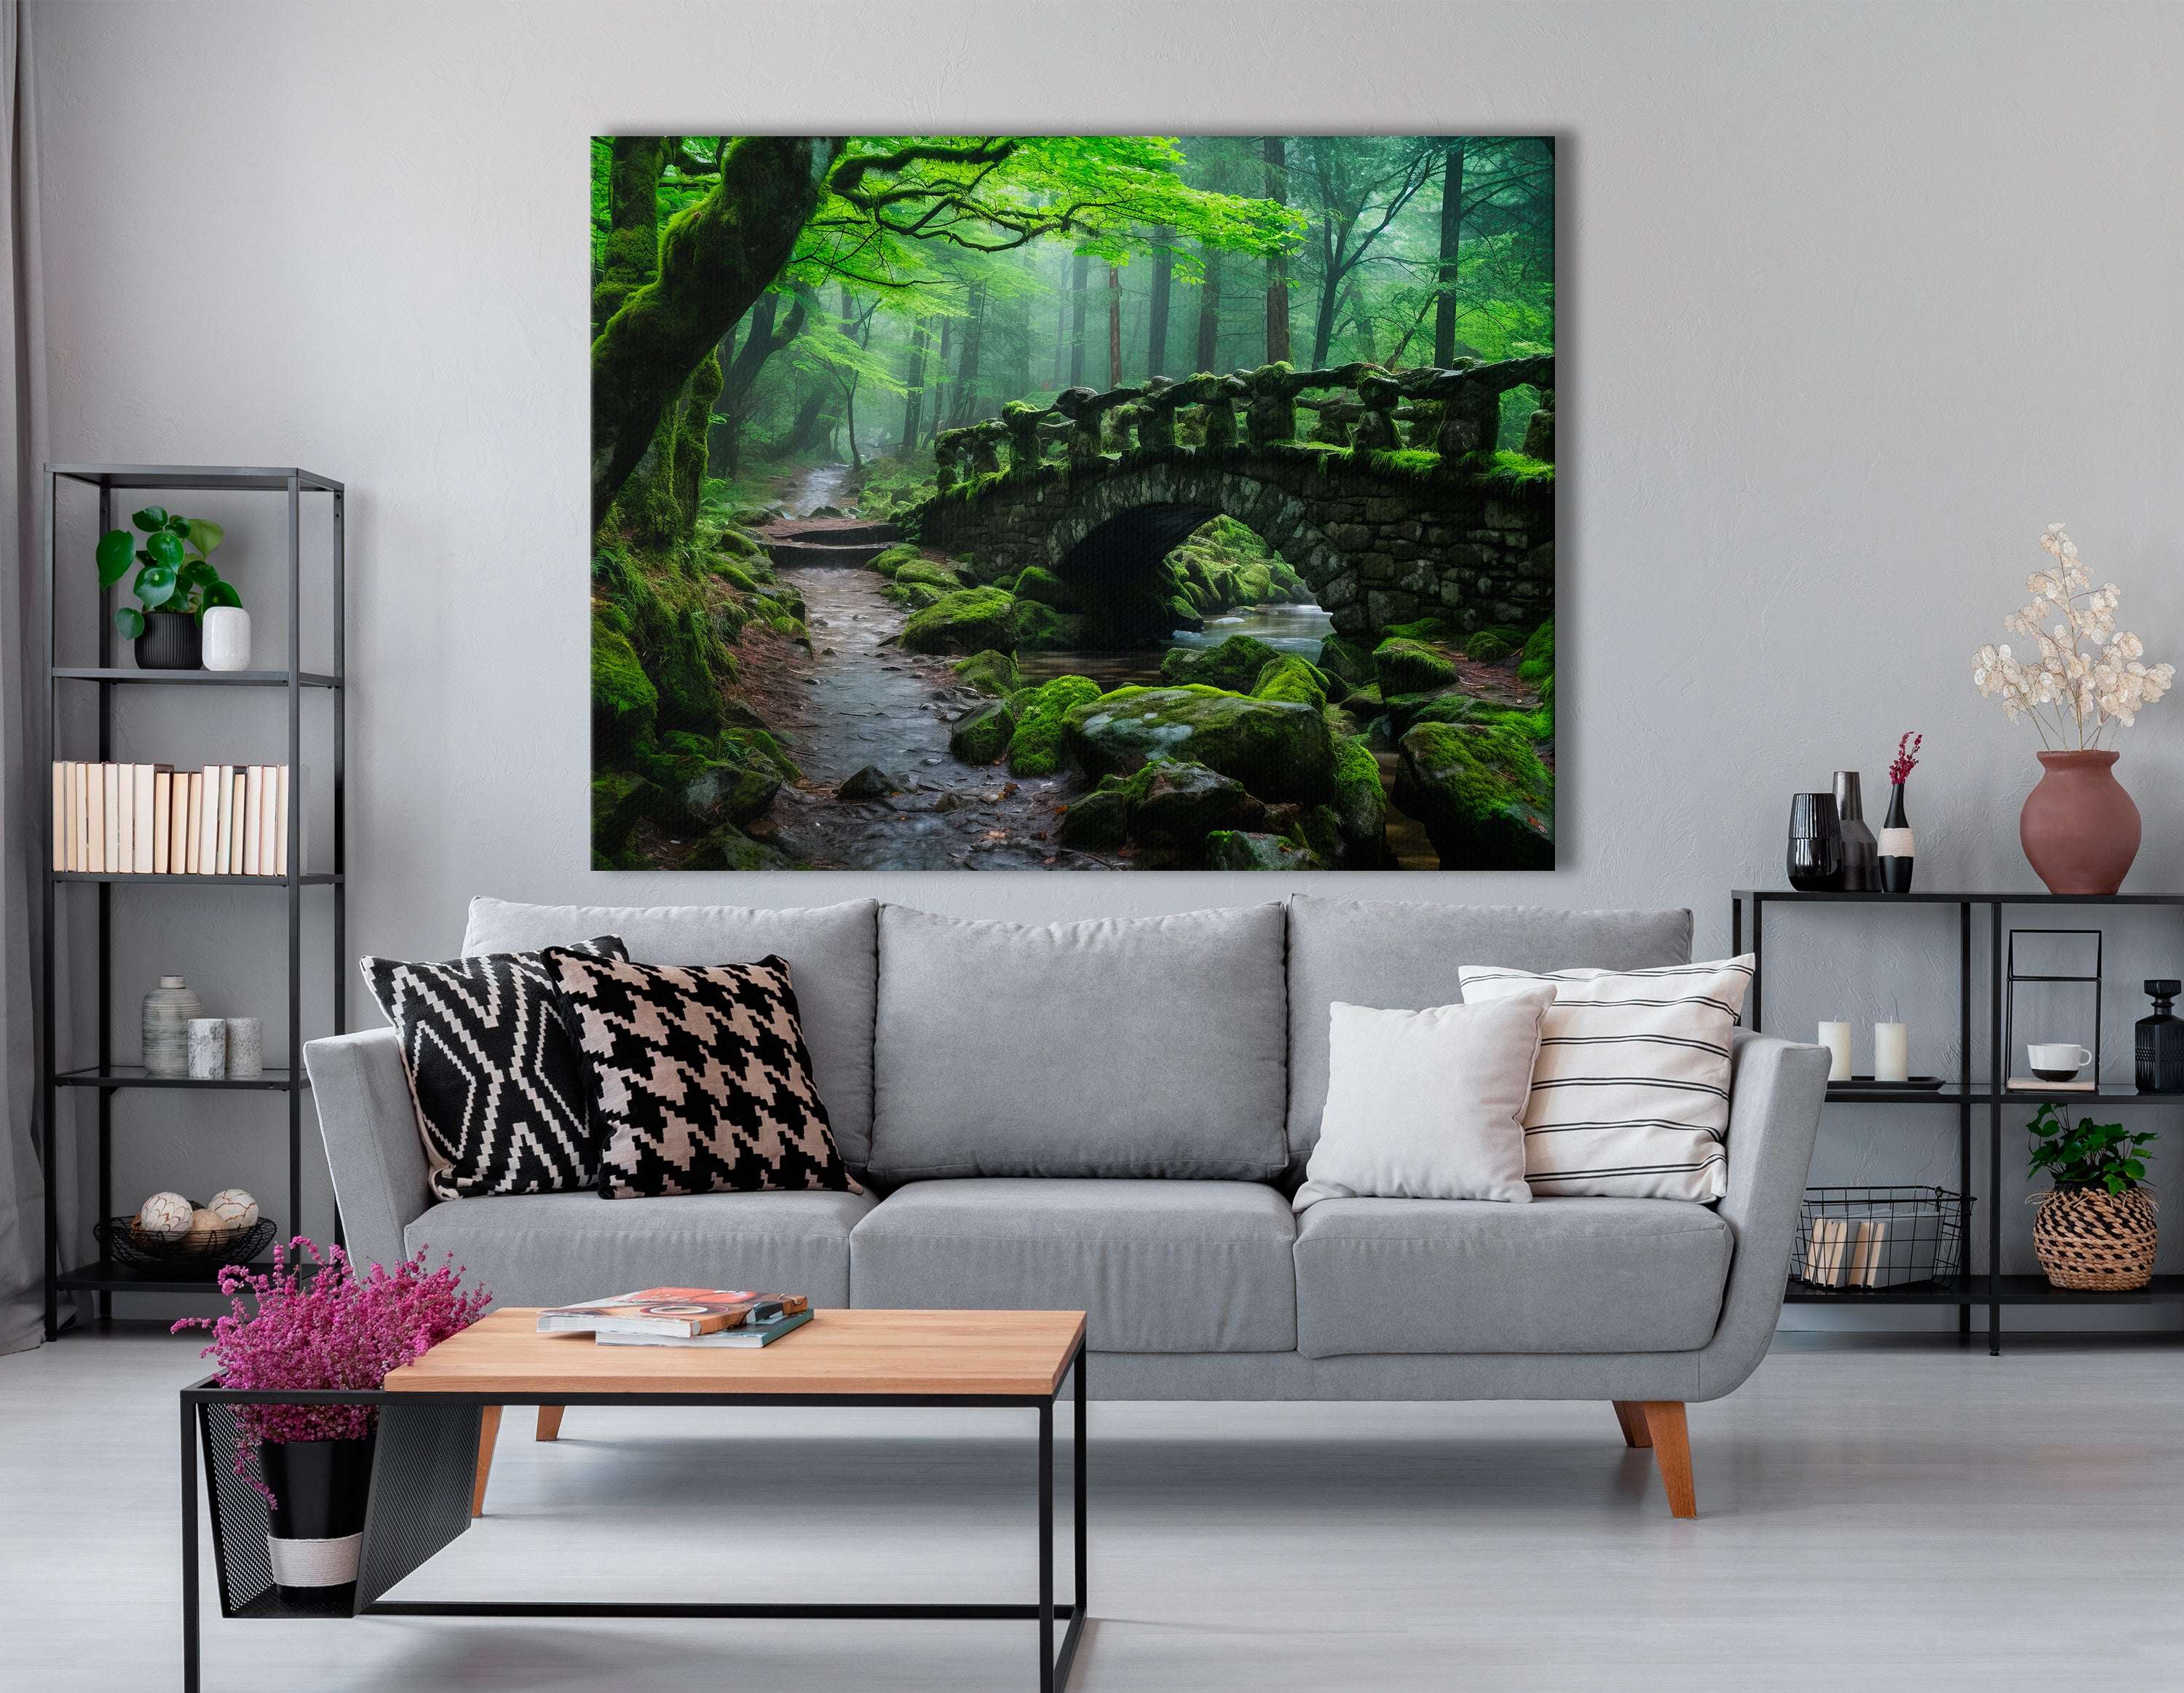 Ancient Stone Bridge in Thick Forest - Canvas Print - Artoholica Ready to Hang Canvas Print